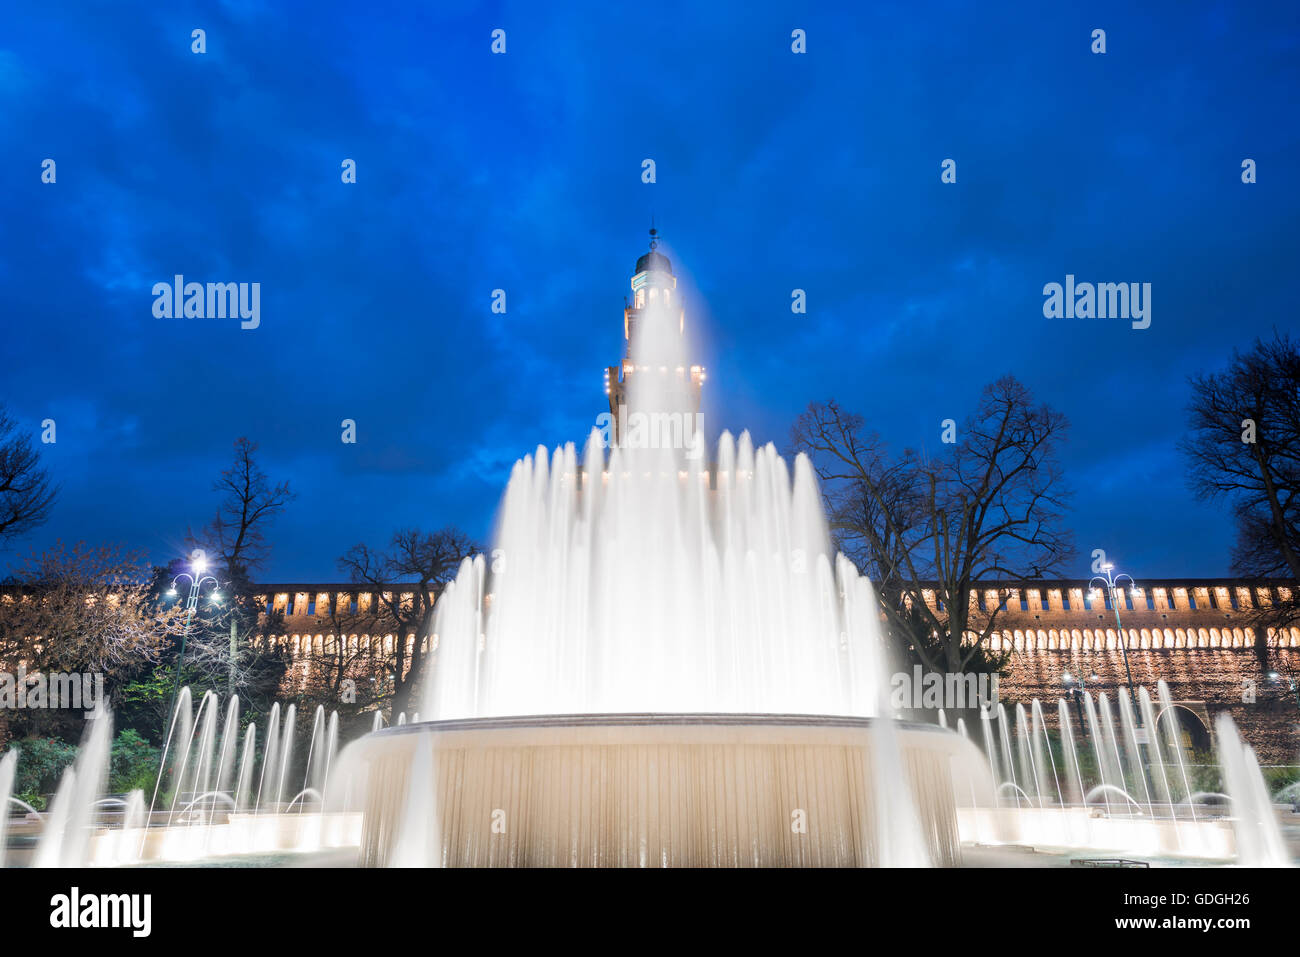 Sforza castle and fountain in blue hour in Milan,Italy. Stock Photo